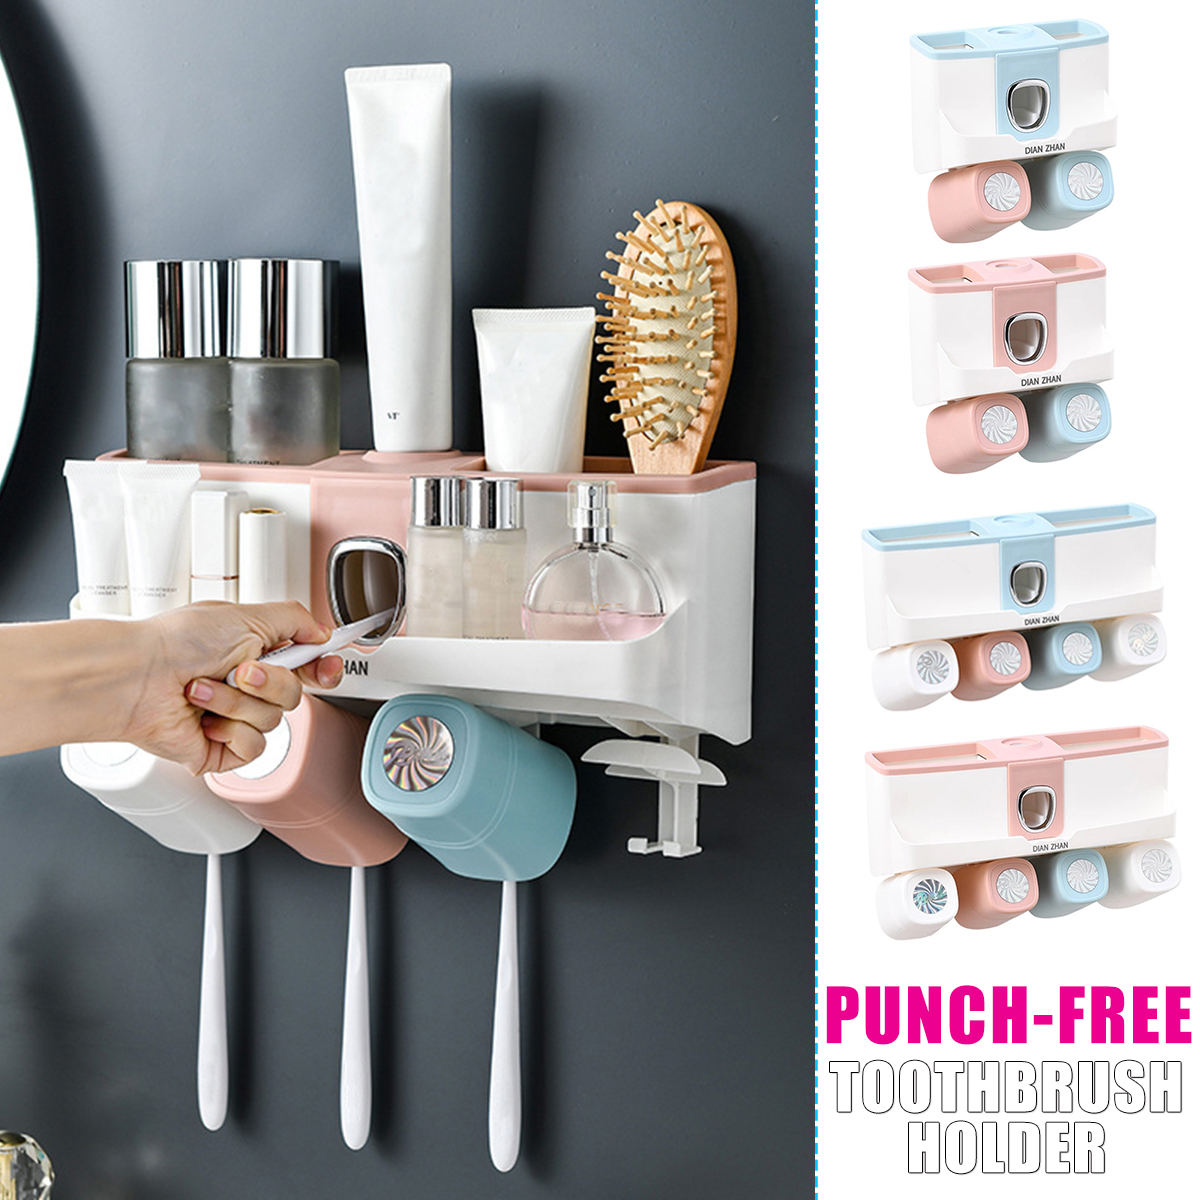 Bakeey-Punch-free-Toothbrush-Holder-Household-Bathroom-Wash-Shelf-Mouthwash-Cup-Toothpaste-Squeezer-1734314-1